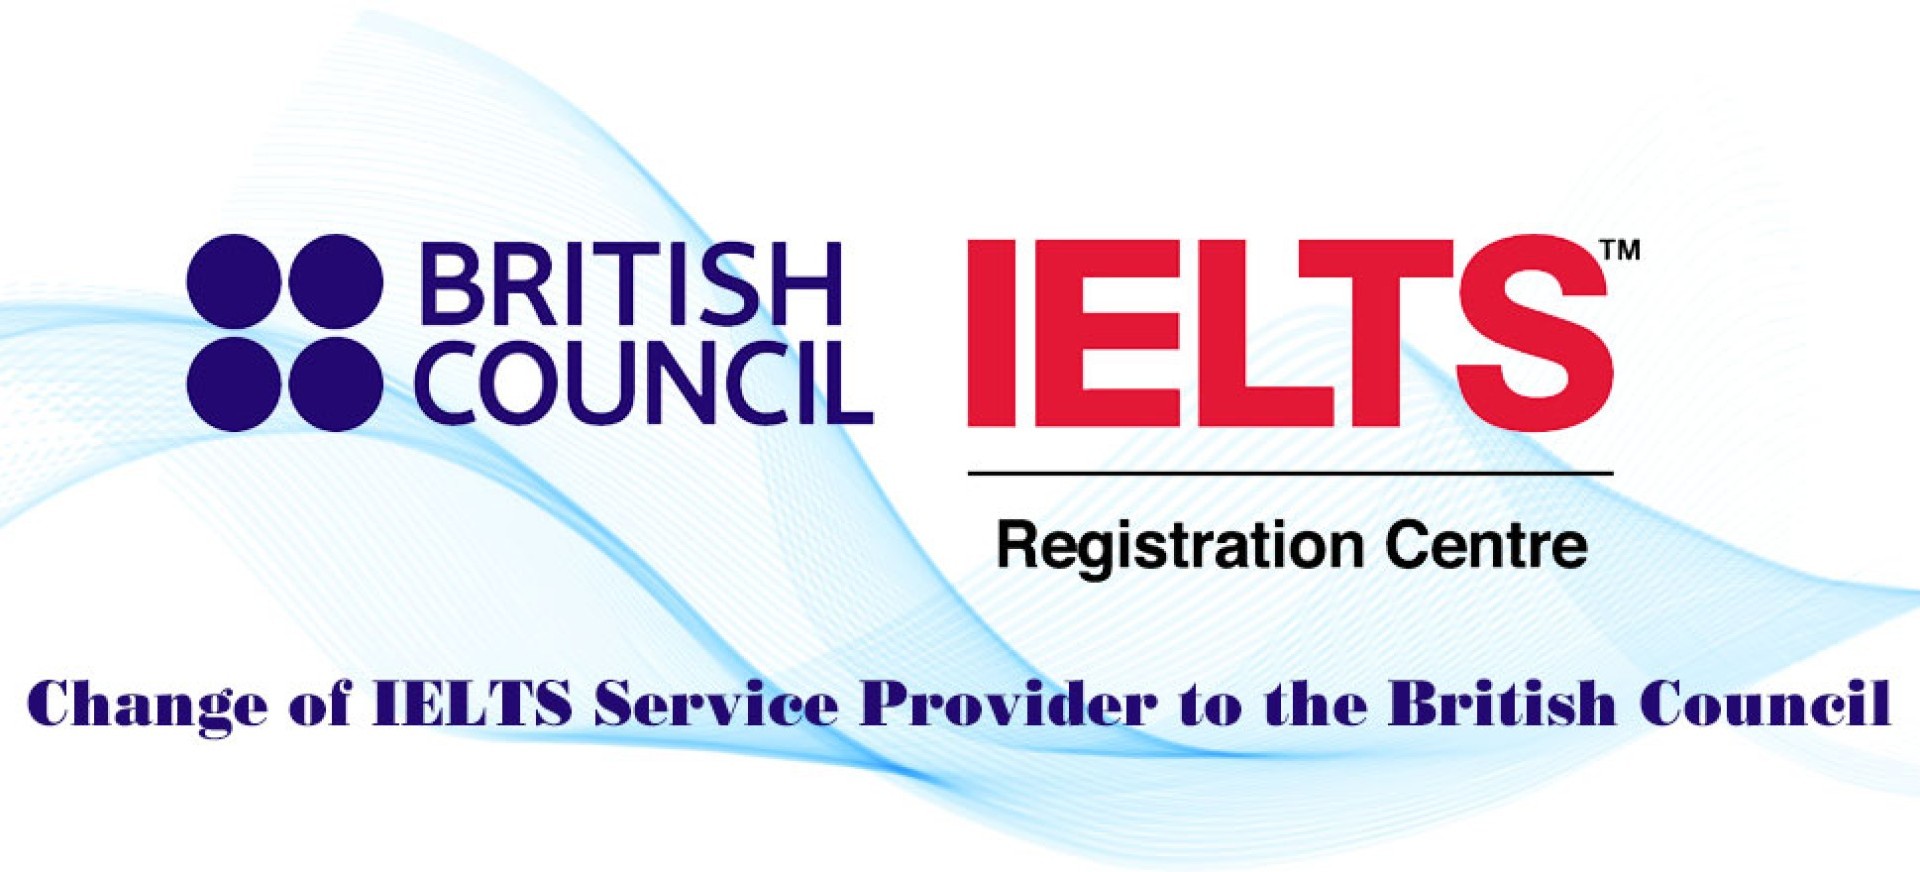 Change of IELTS service provider to the British Council